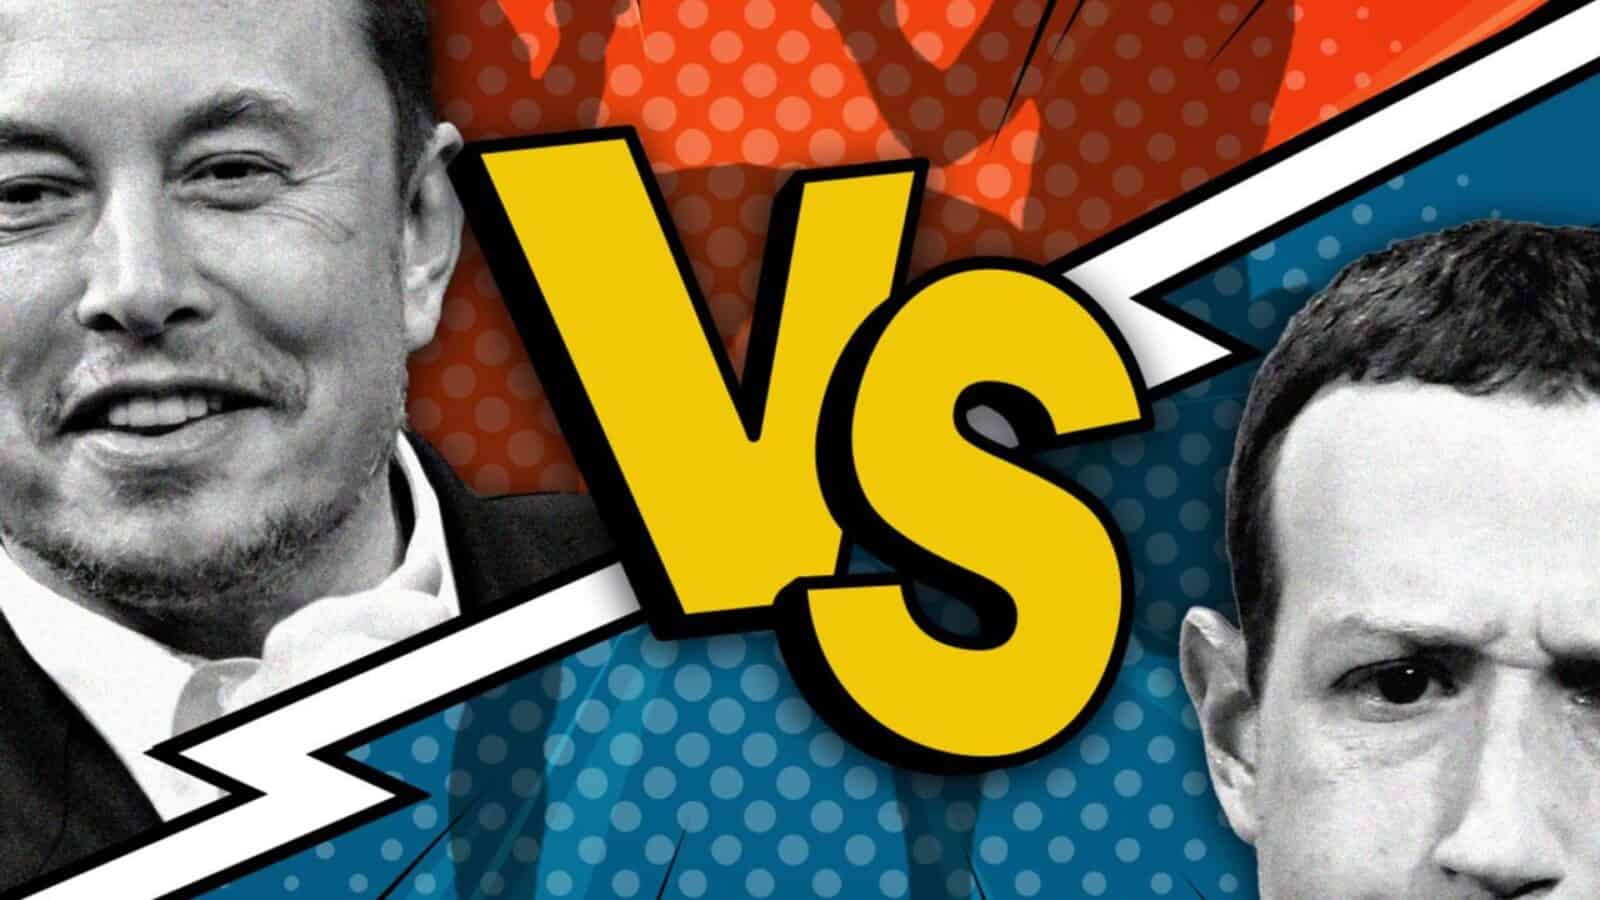 Musk vs Zuckerberg Charity Cage Match to be Broadcast Live on Platform X In a surprising announcement, Tesla and Space X CEO Elon Musk revealed that his proposed fight with Meta's CEO, Mark Zuckerberg, will be streamed live on social media platform X (formerly known as Twitter).